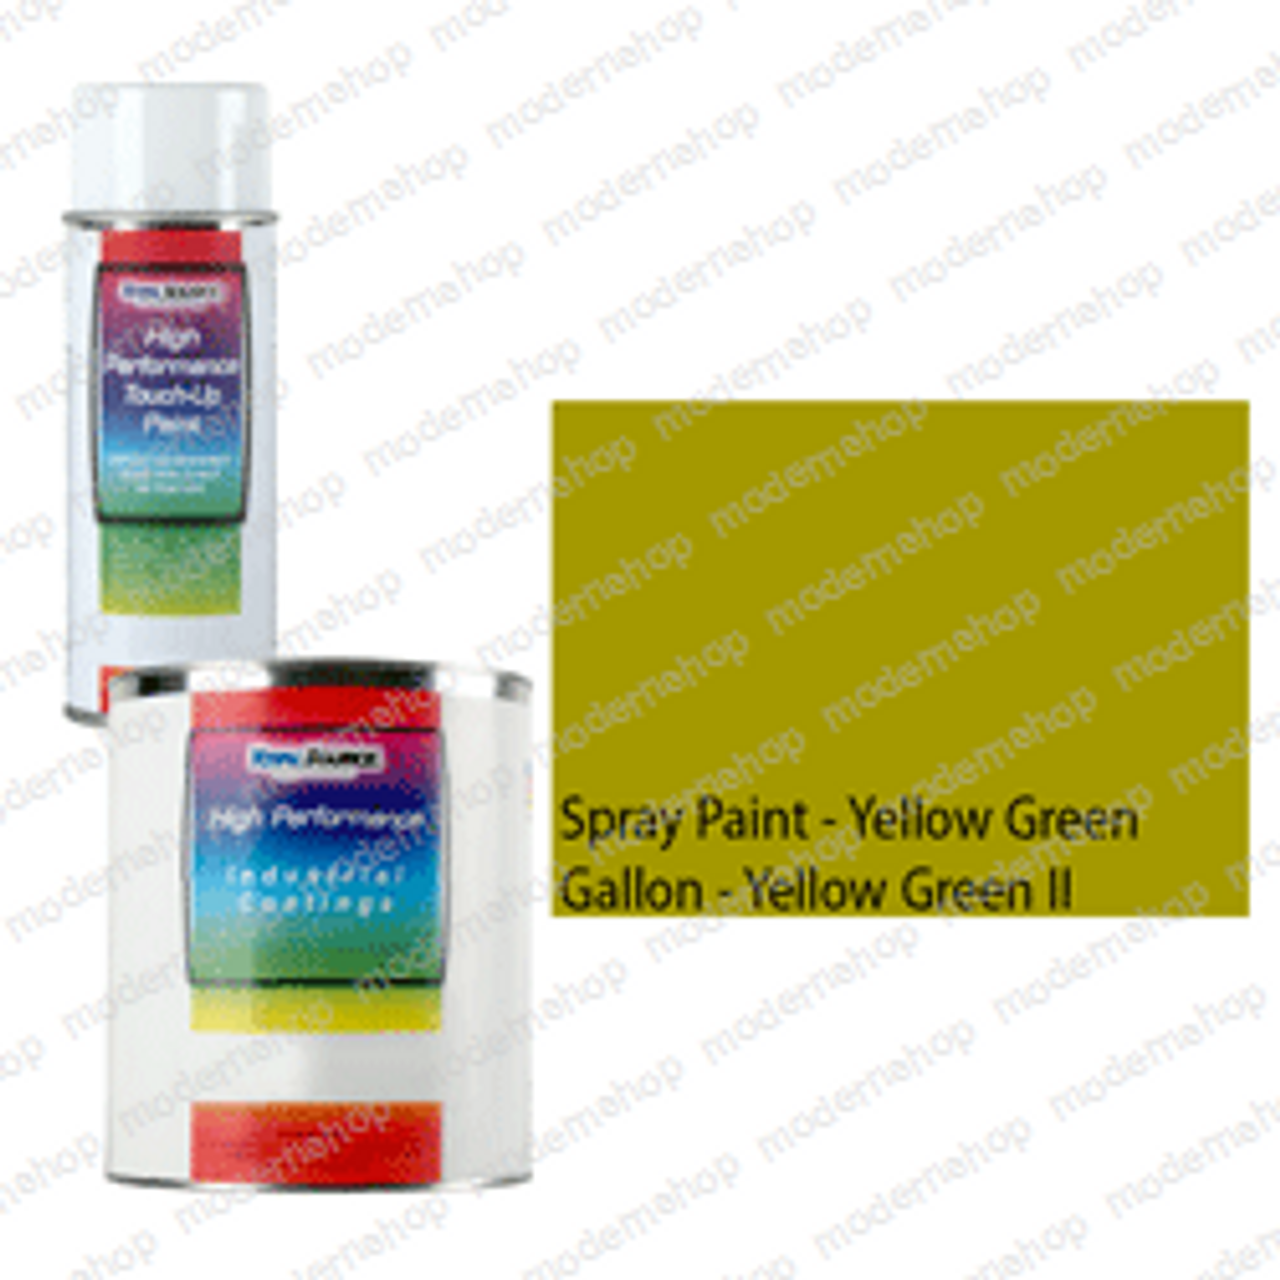 41029: TotalSource SPRAY PAINT - YELLOW GREEN II